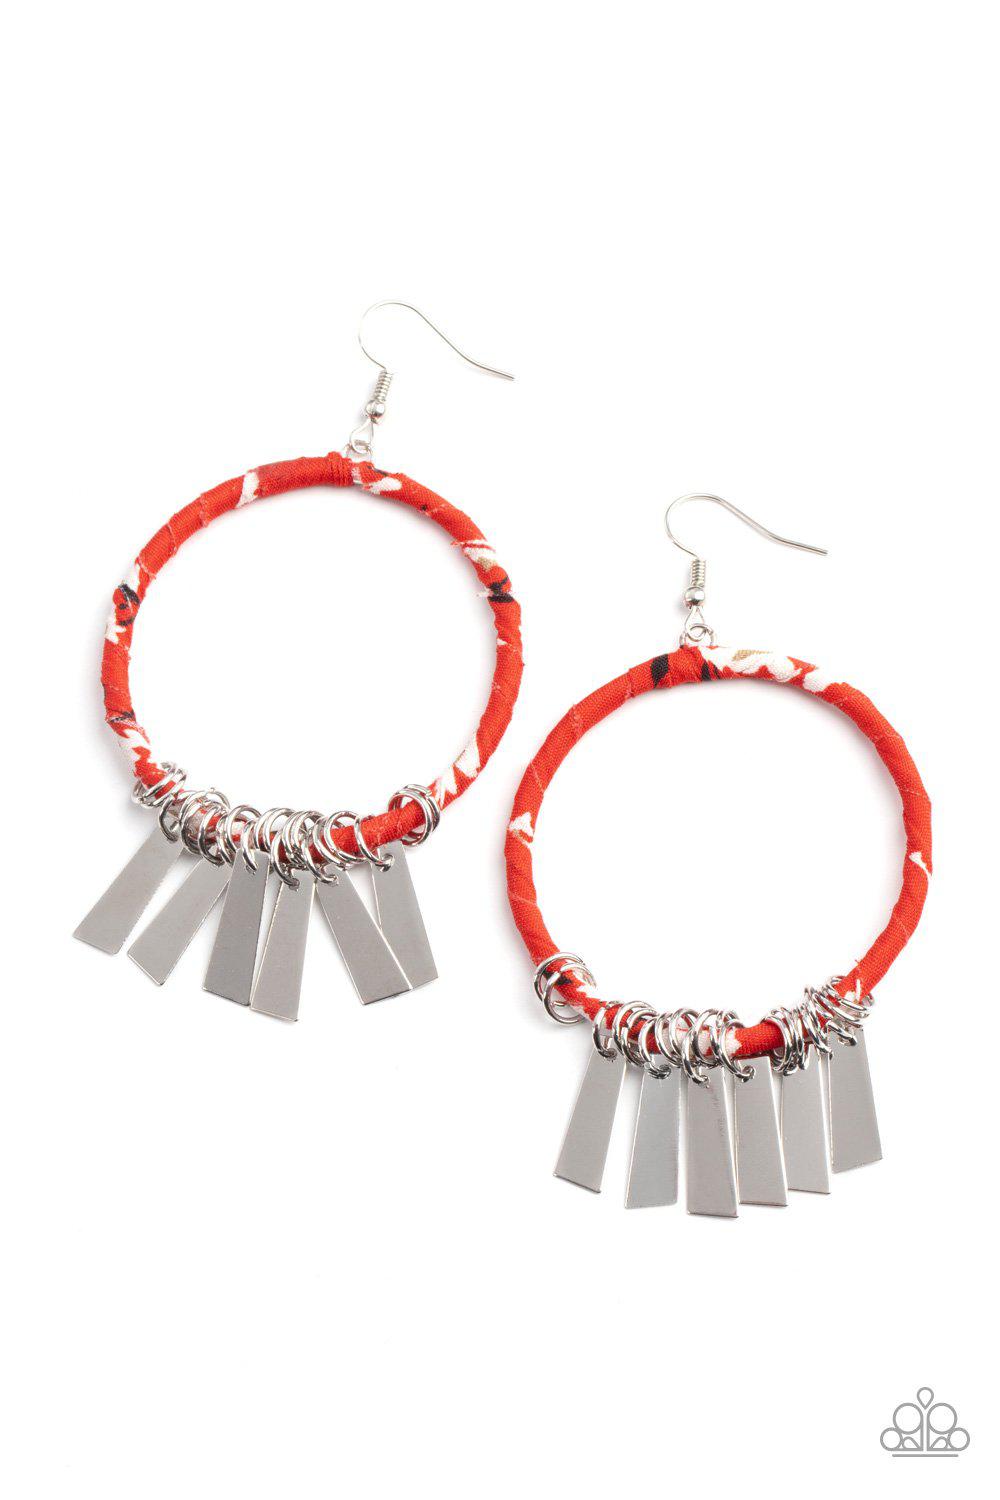 Garden Chimes Red and Silver Earrings - Paparazzi Accessories- lightbox - CarasShop.com - $5 Jewelry by Cara Jewels